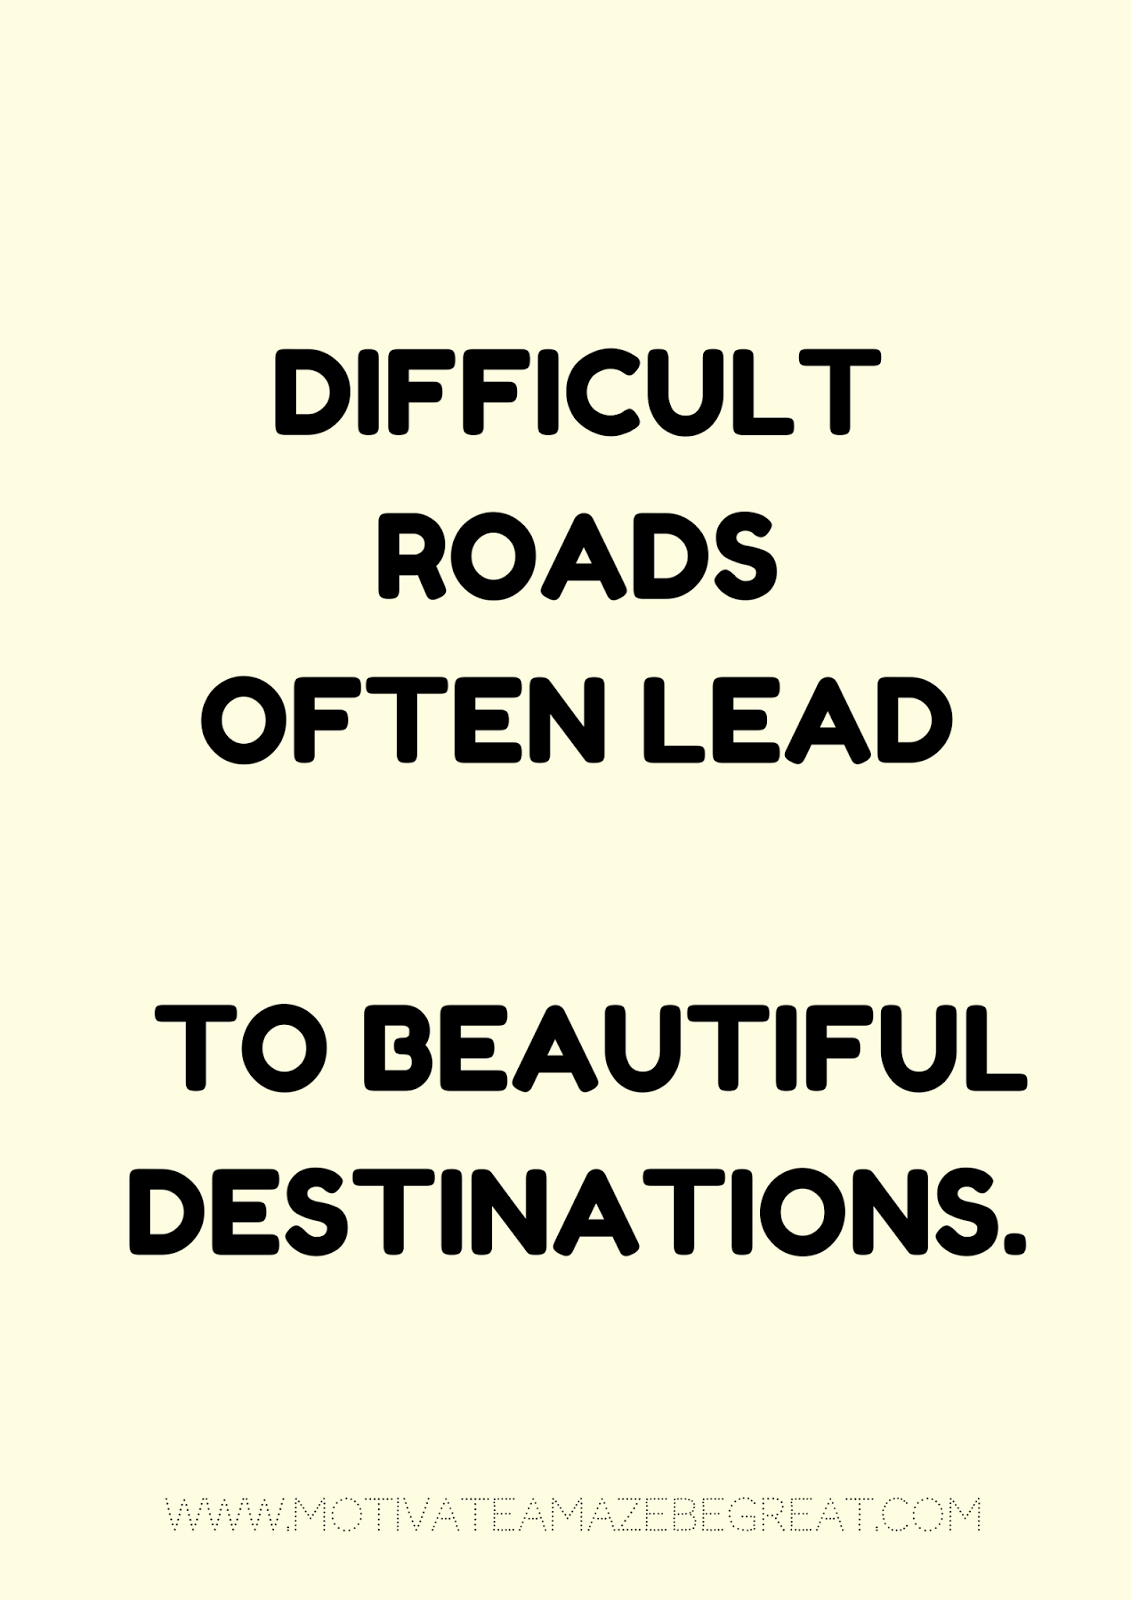 27 Self Motivation Quotes And Posters For Success "Difficult roads often lead to beautiful